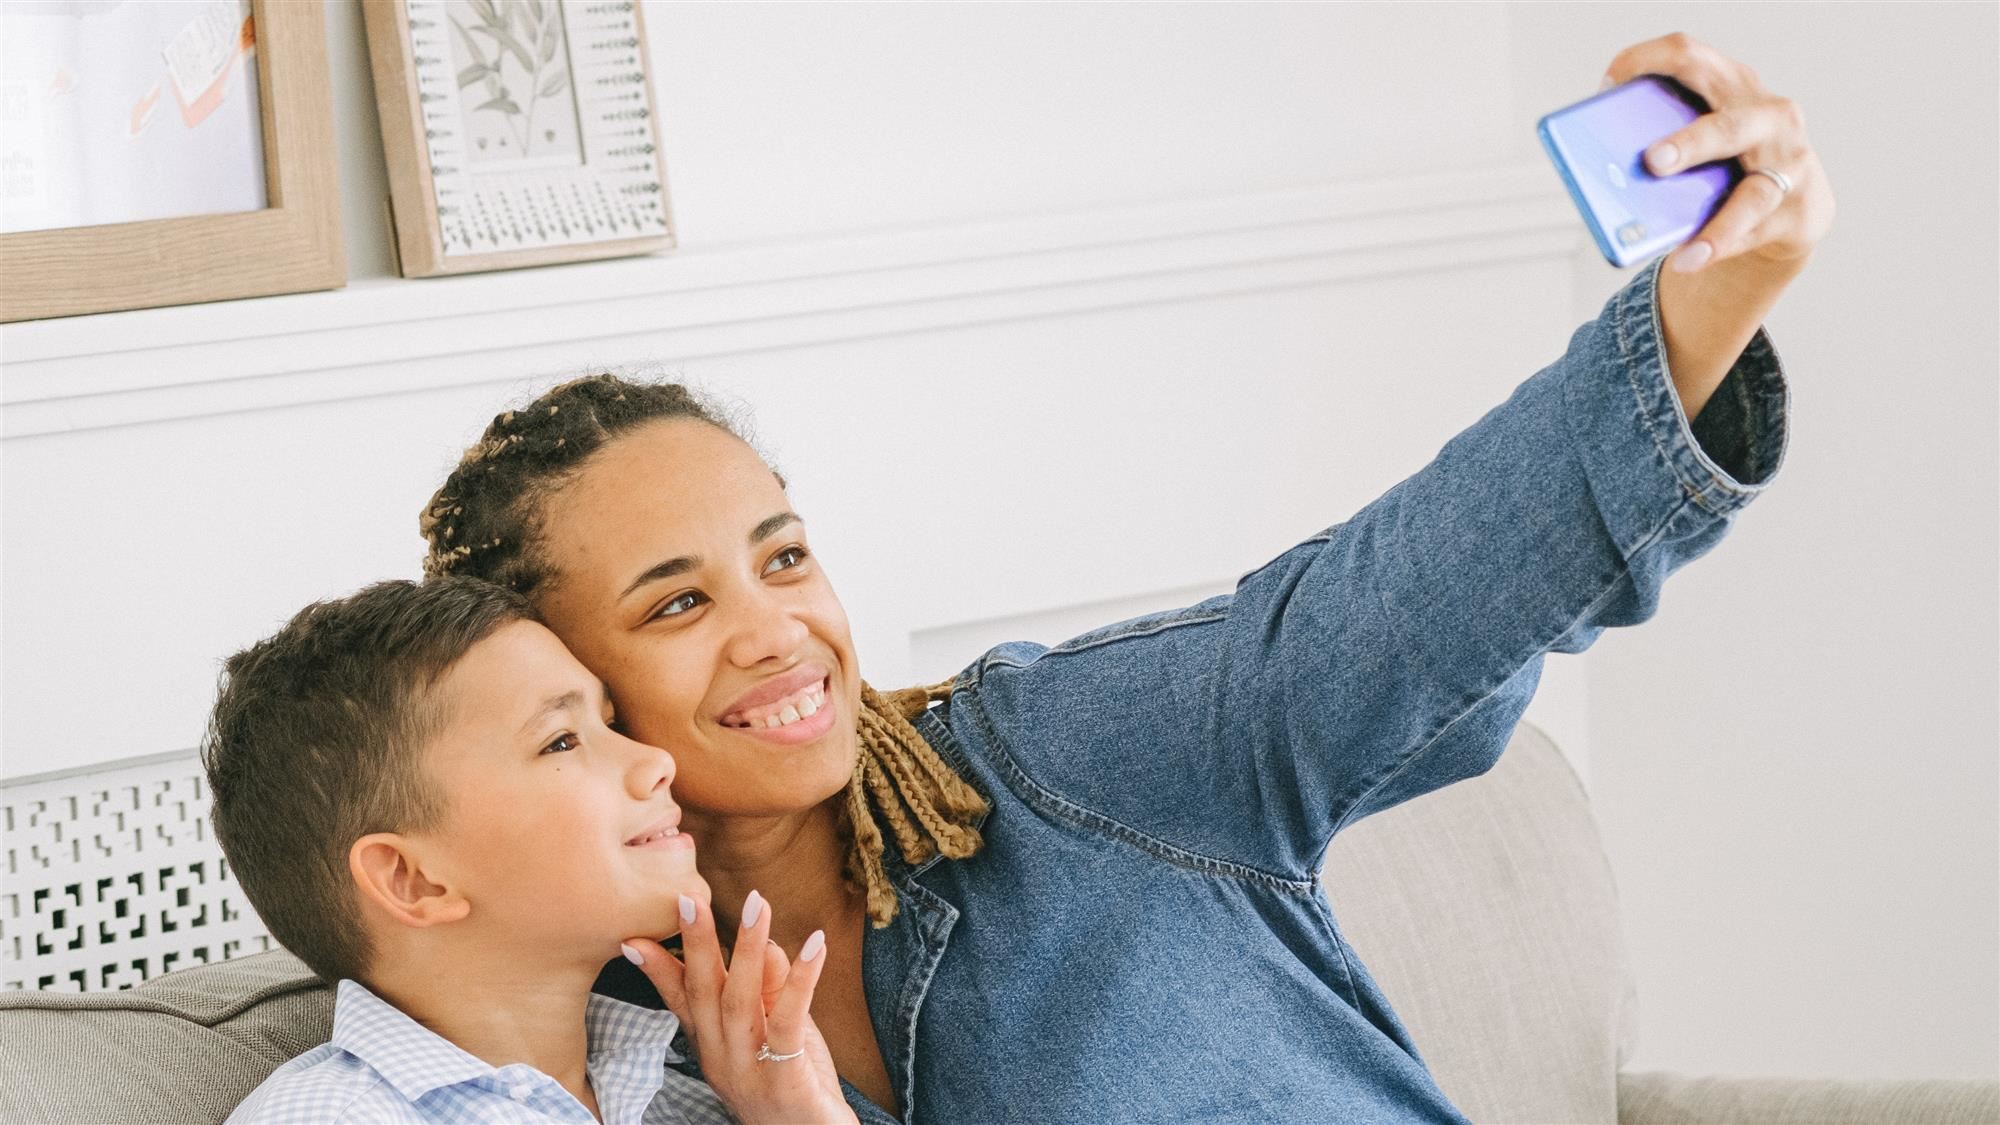 Mom taking a selfie photo with son